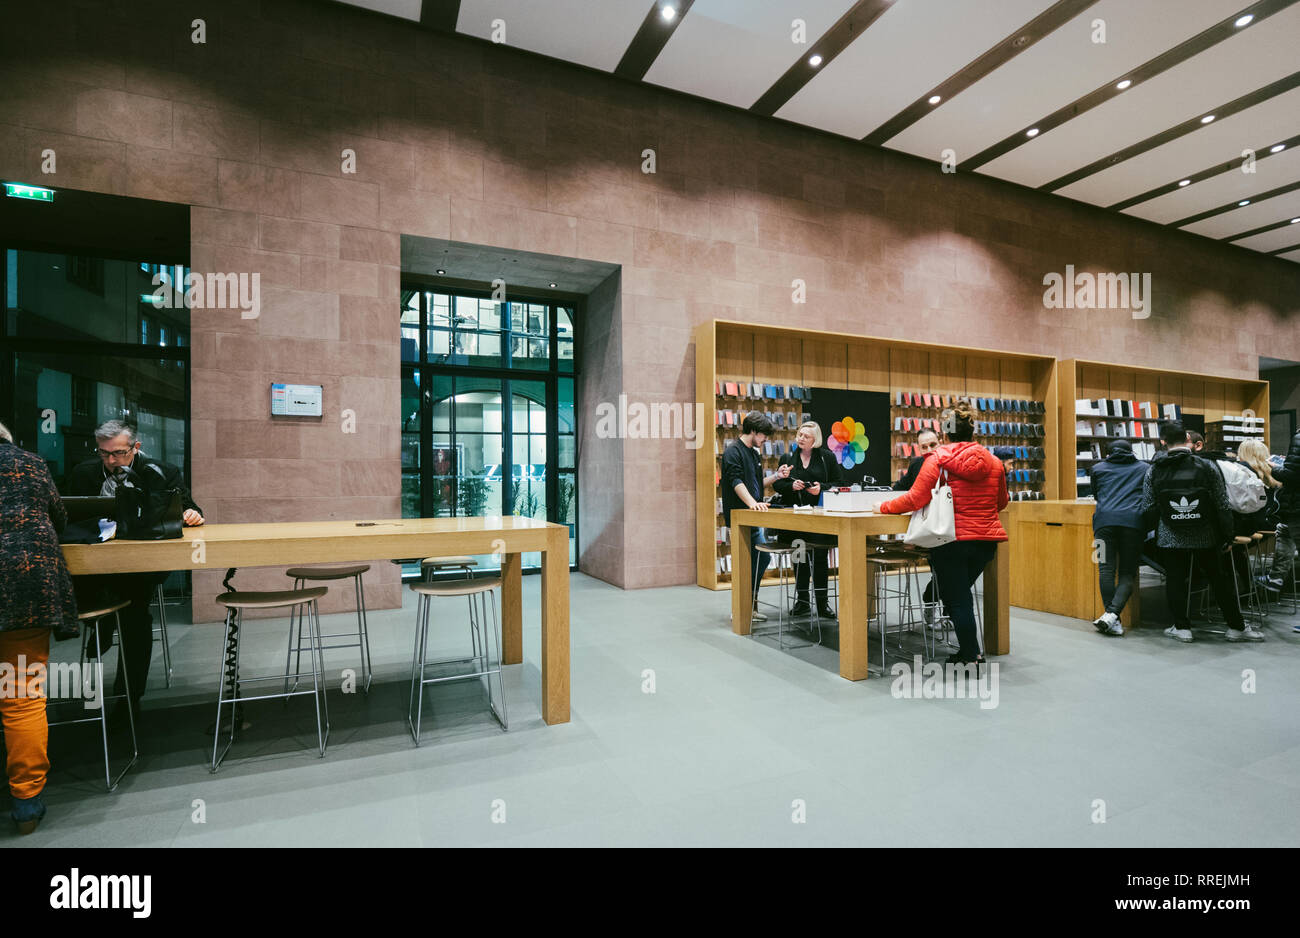 603 Apple Store Employee Images, Stock Photos, 3D objects, & Vectors